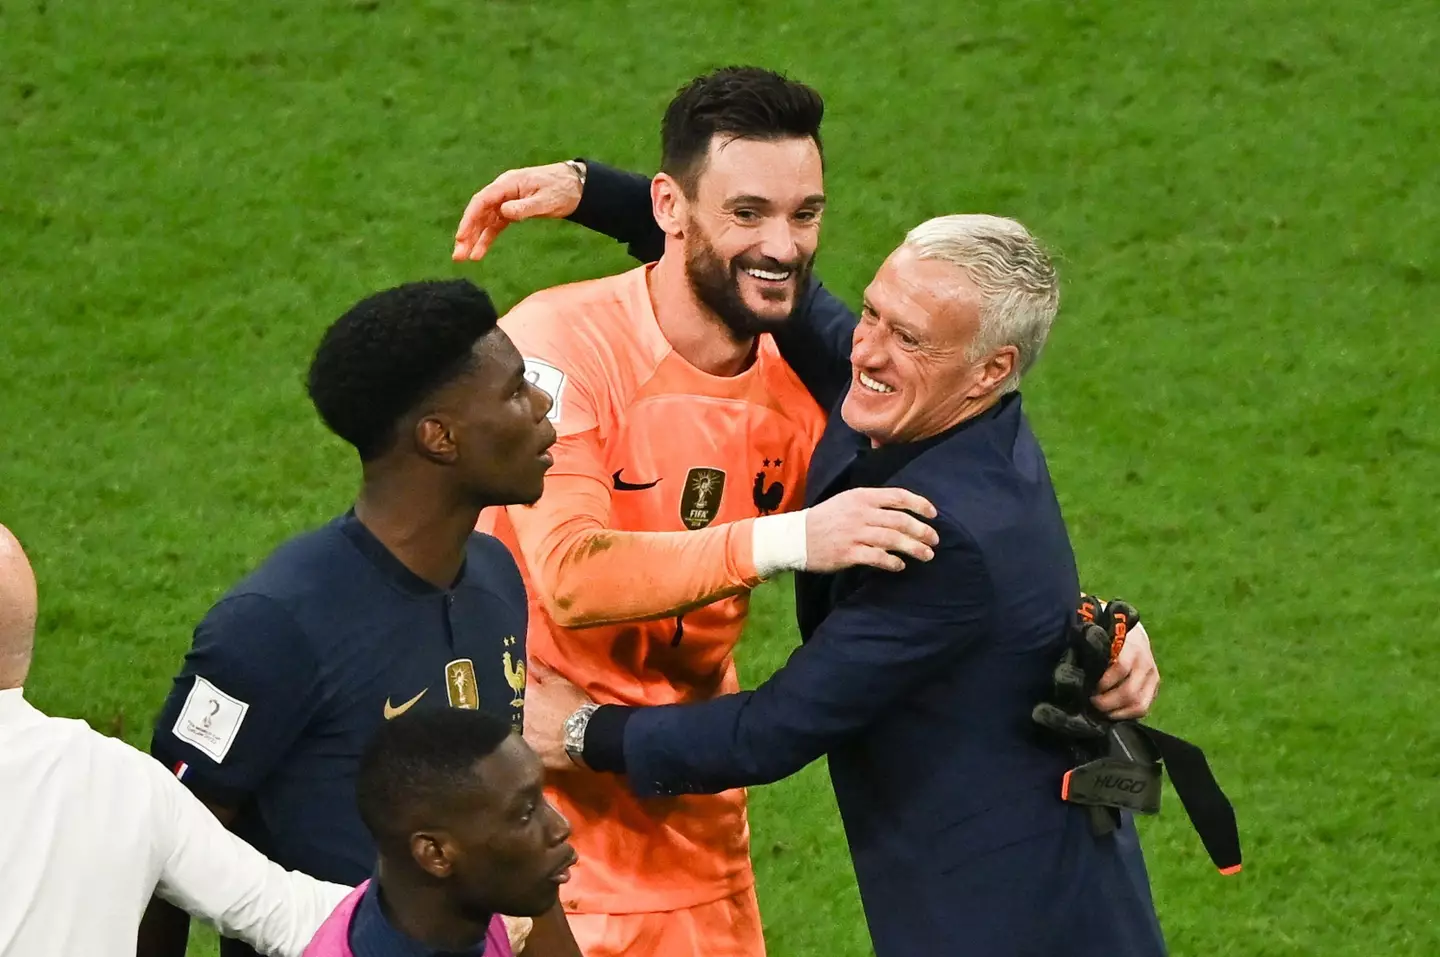 Deschamps is set to stay on as France head coach for another tournament. (Image